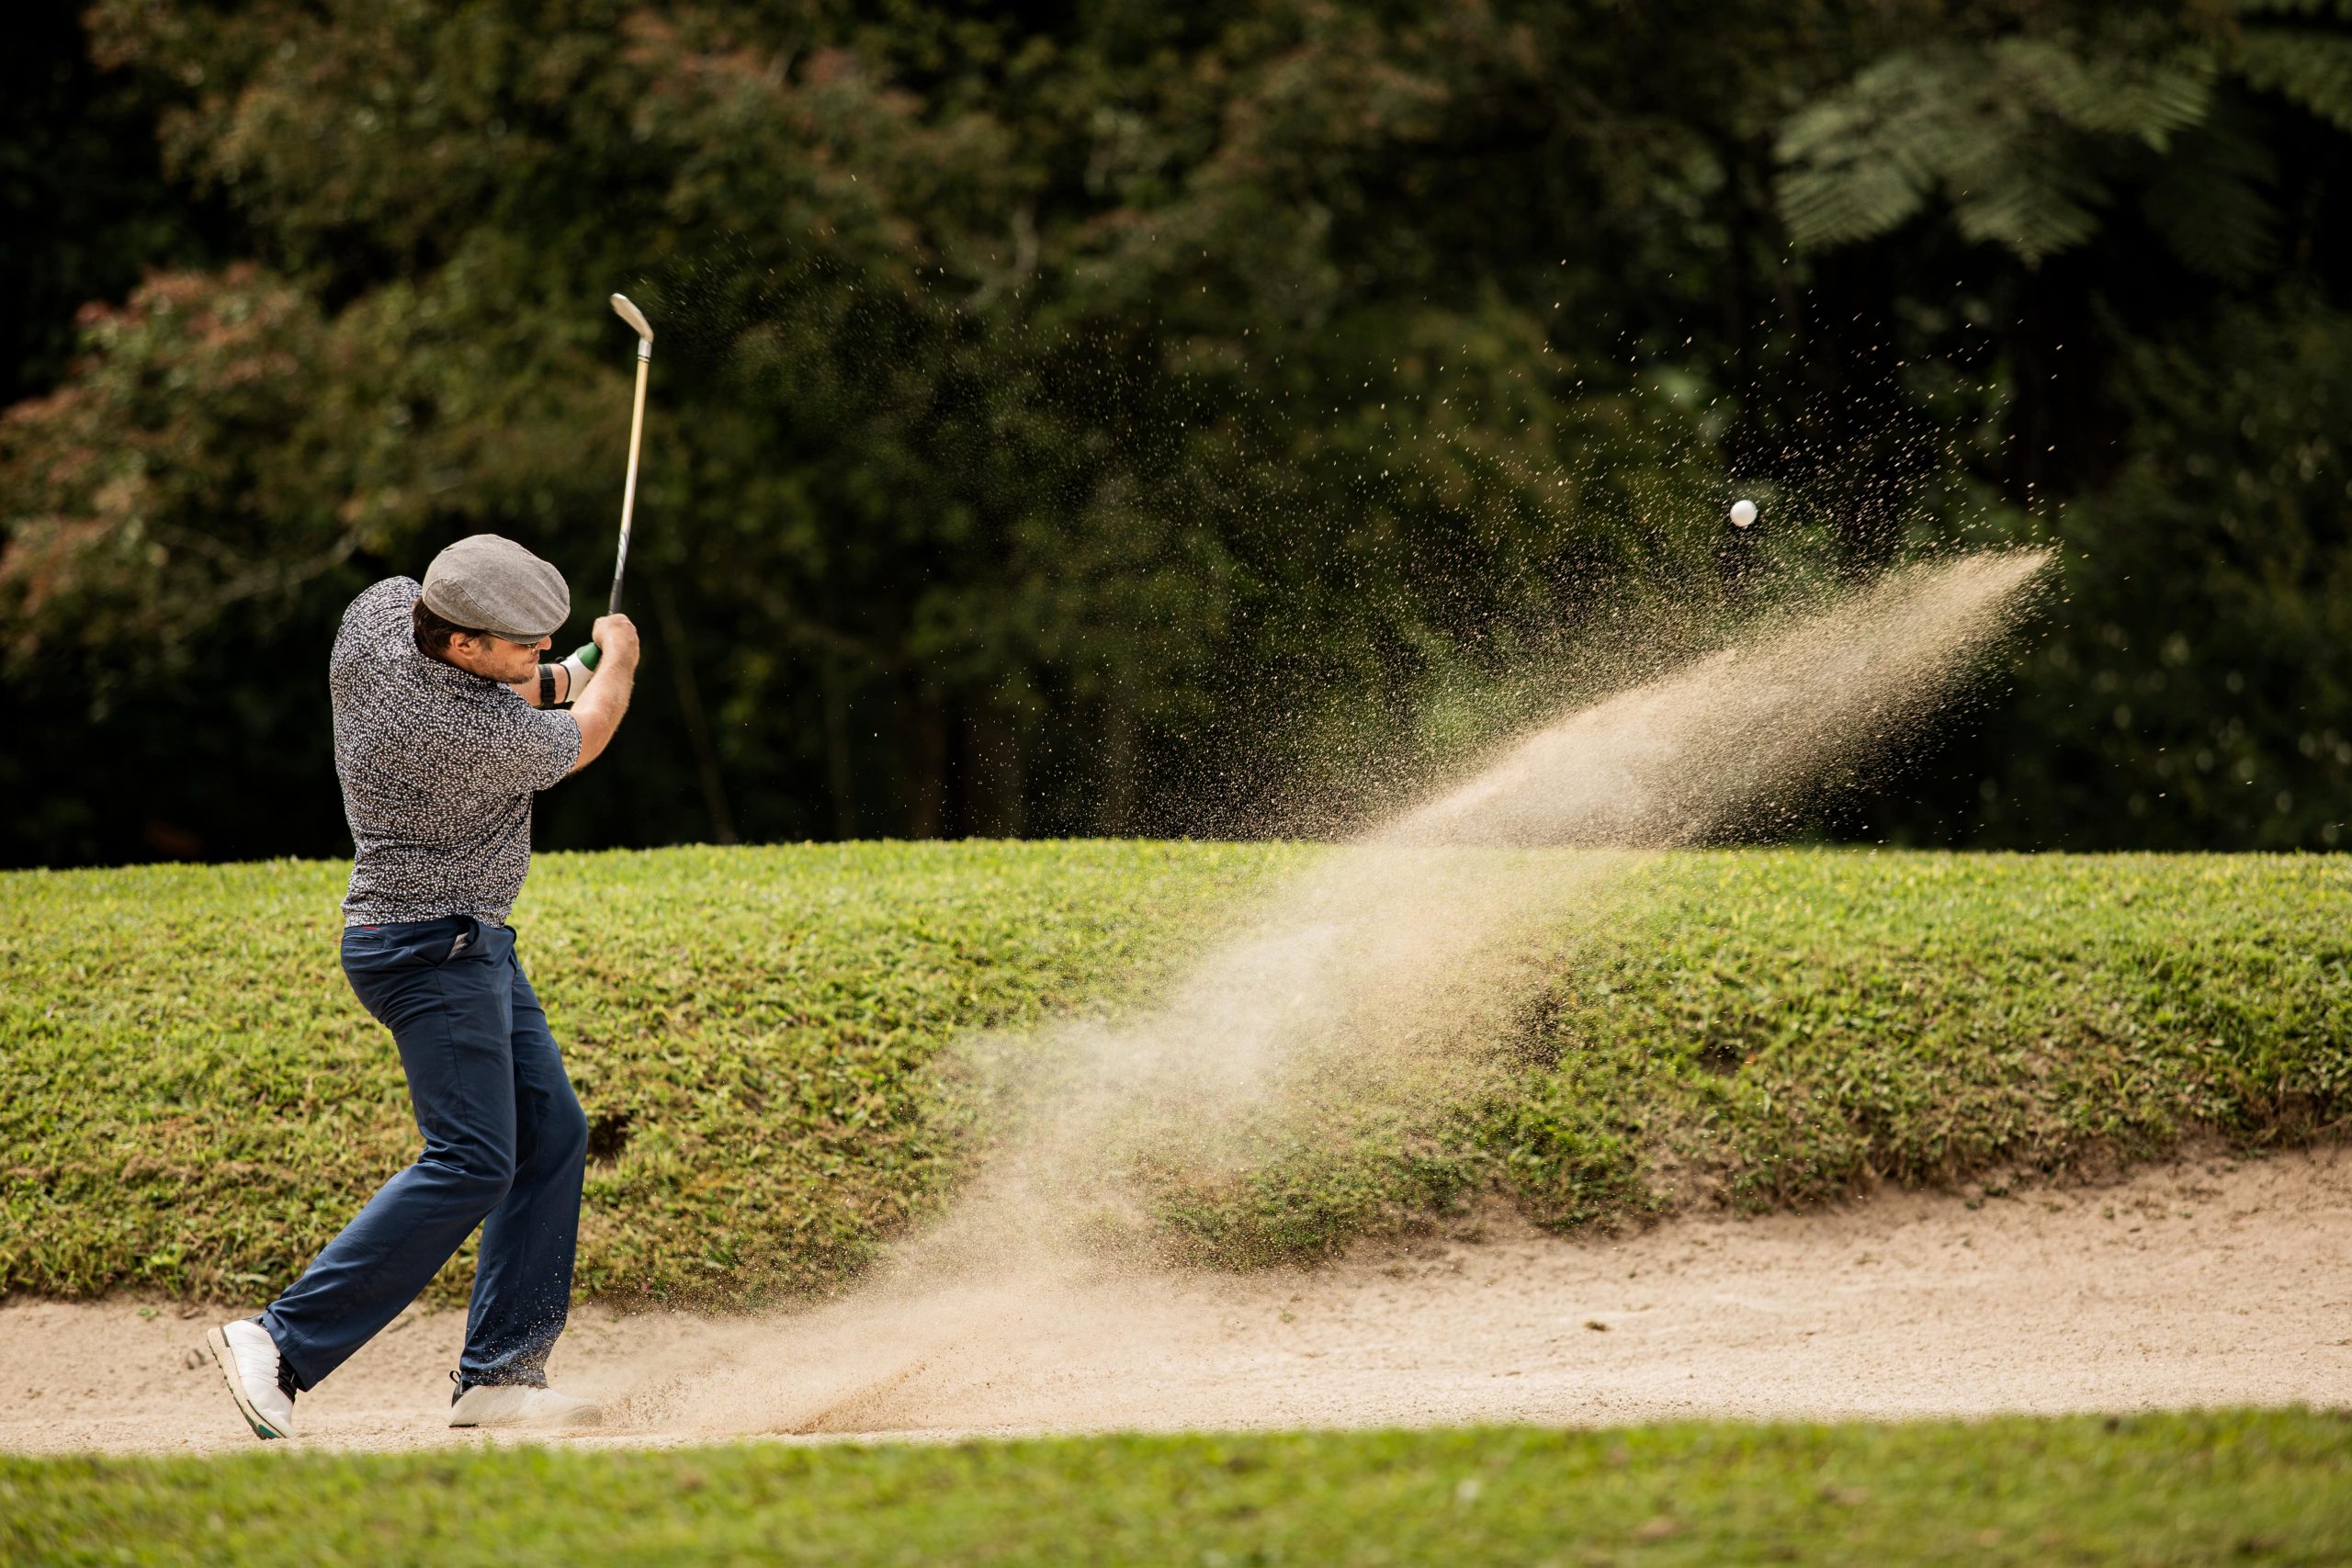 Learning to play golf: how to improve your game from a bunker?